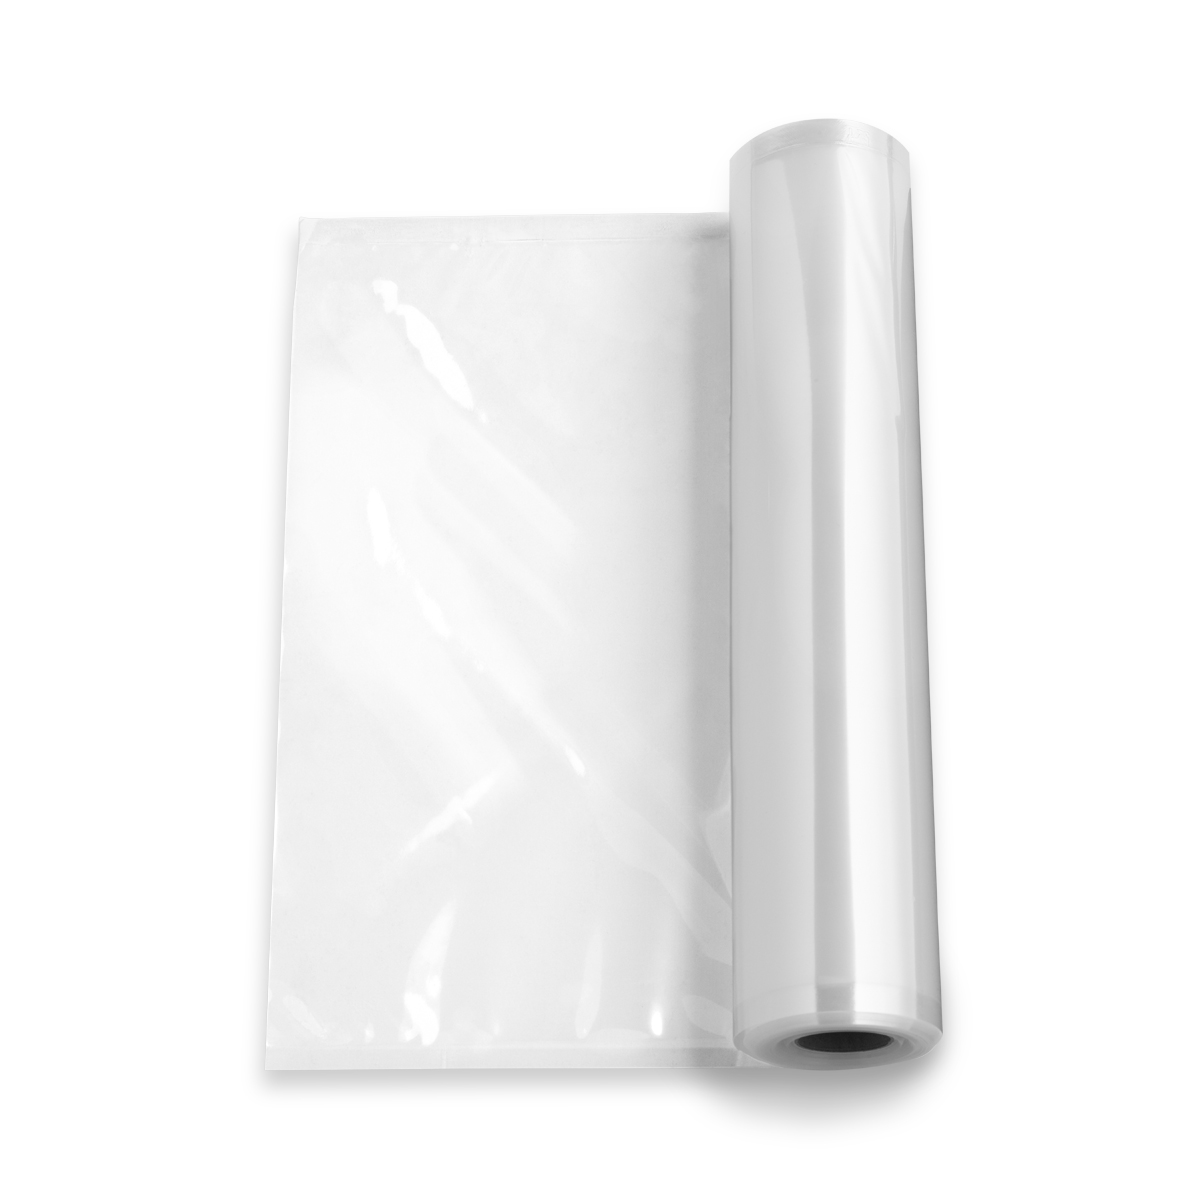 Waring Products WVS2GL 2 Gallon Vacuum Seal Bags - 25 / PK